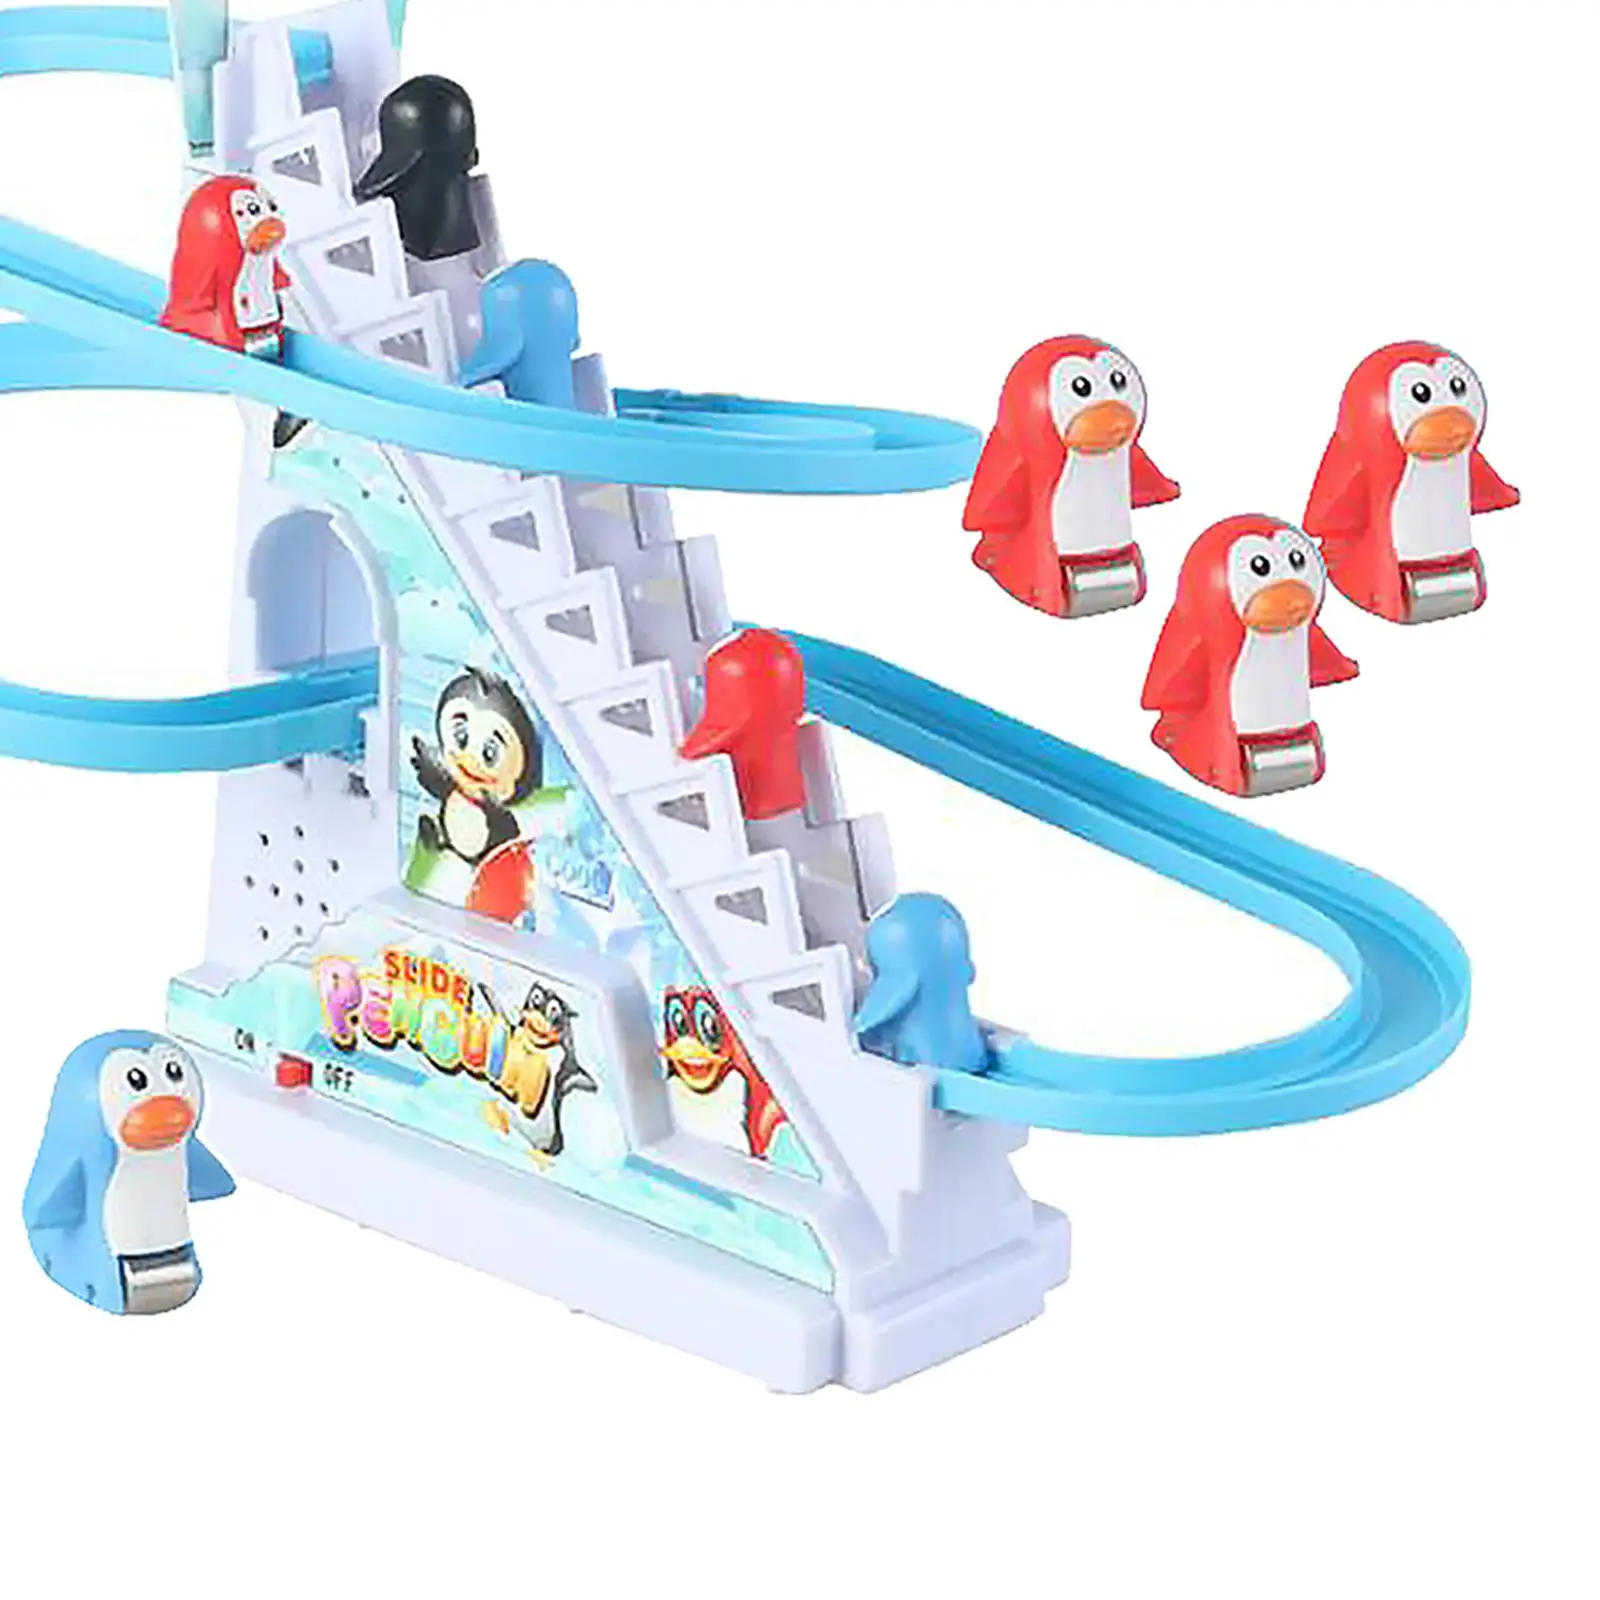 Penguins Slide Stairs Indoor Toy Penguin Stair Climbing Toy for Preschool